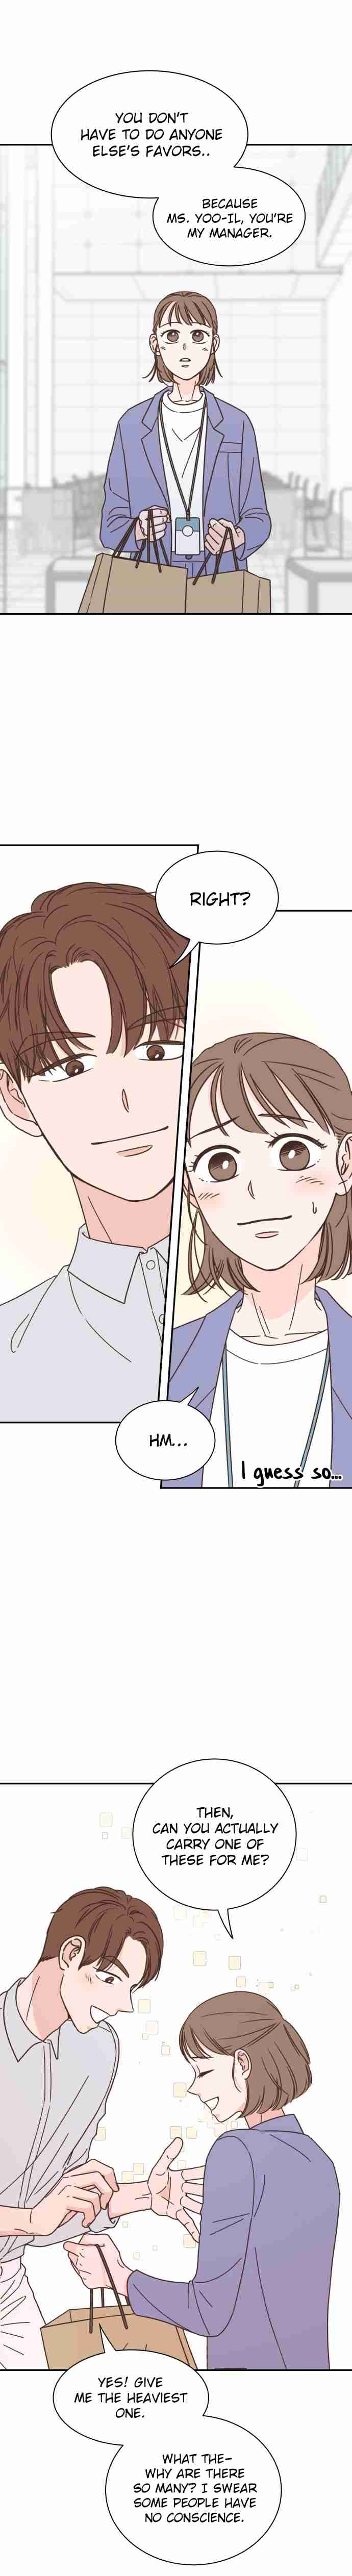 One of a Kind Romance Ch. 91